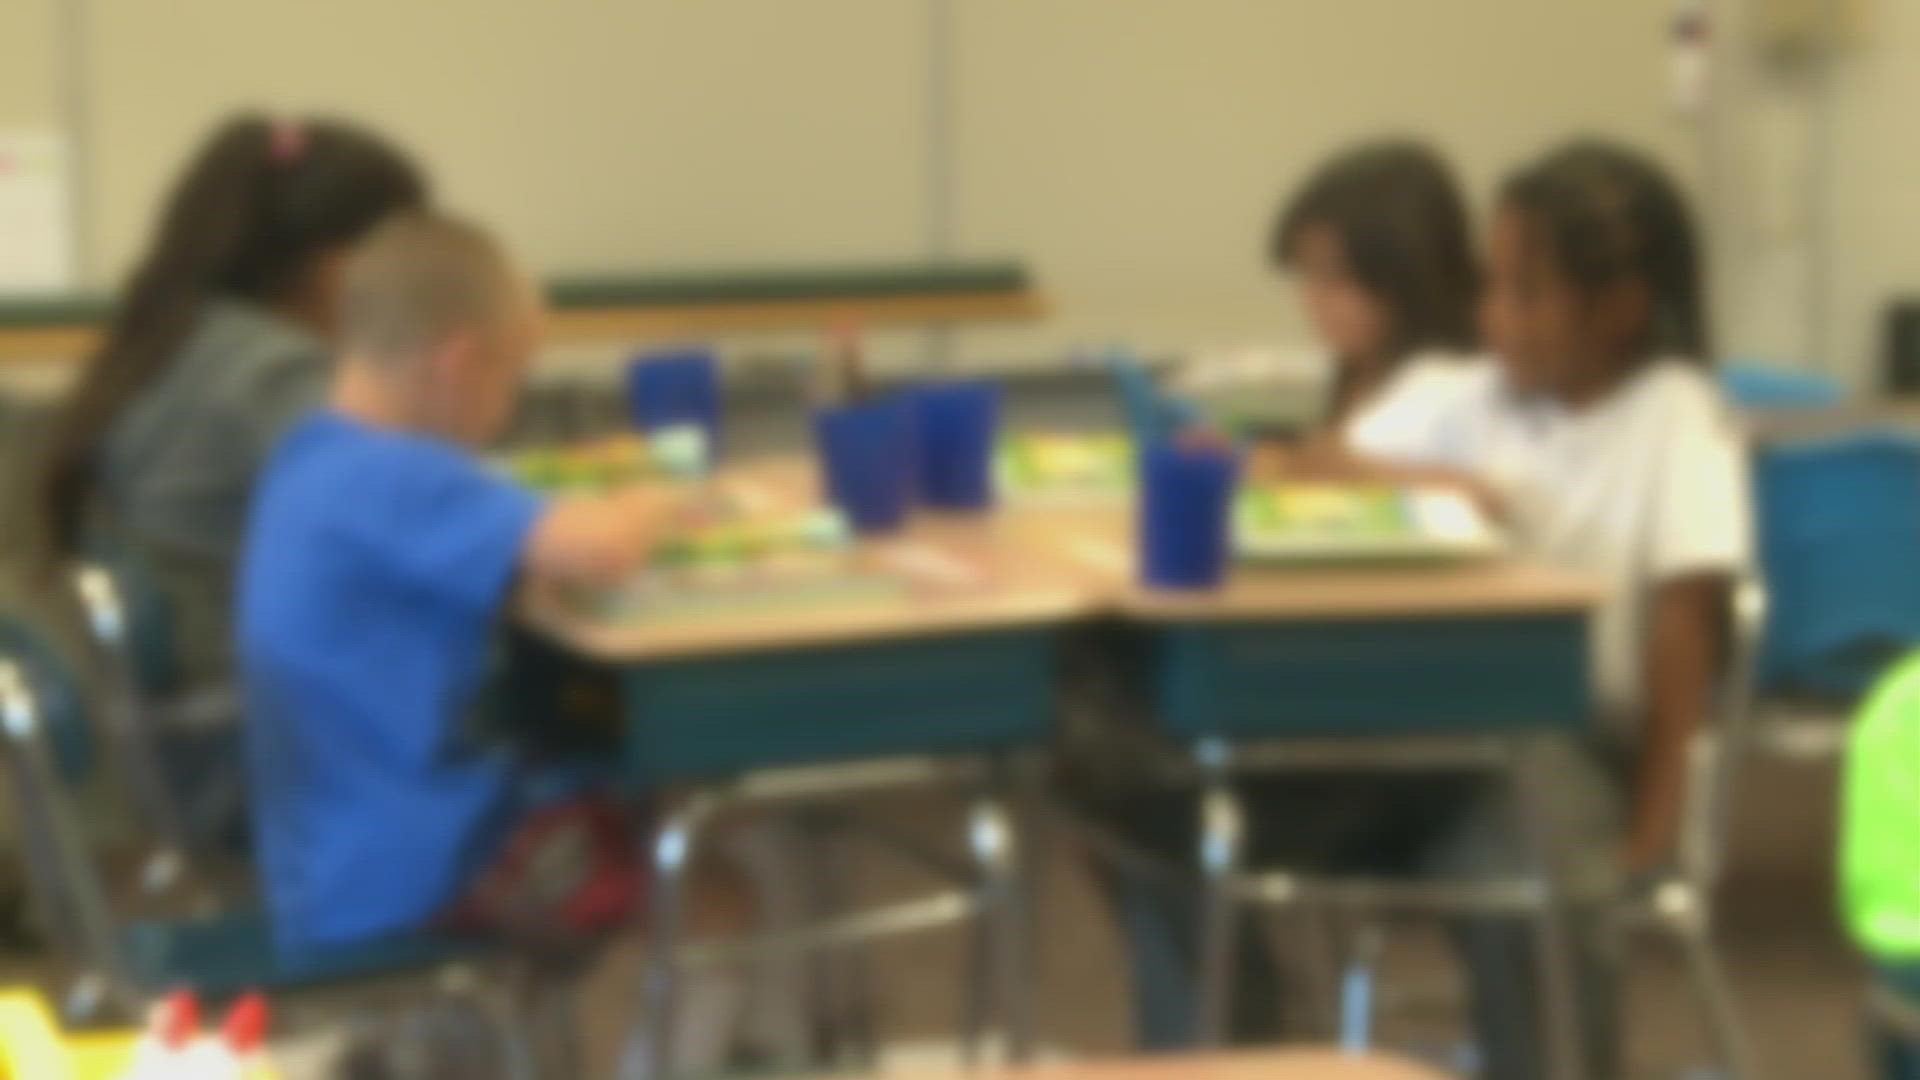 In April, students across Tennessee will need to take a state test. That test could determine if they pass the third grade, or if they need to repeat it.